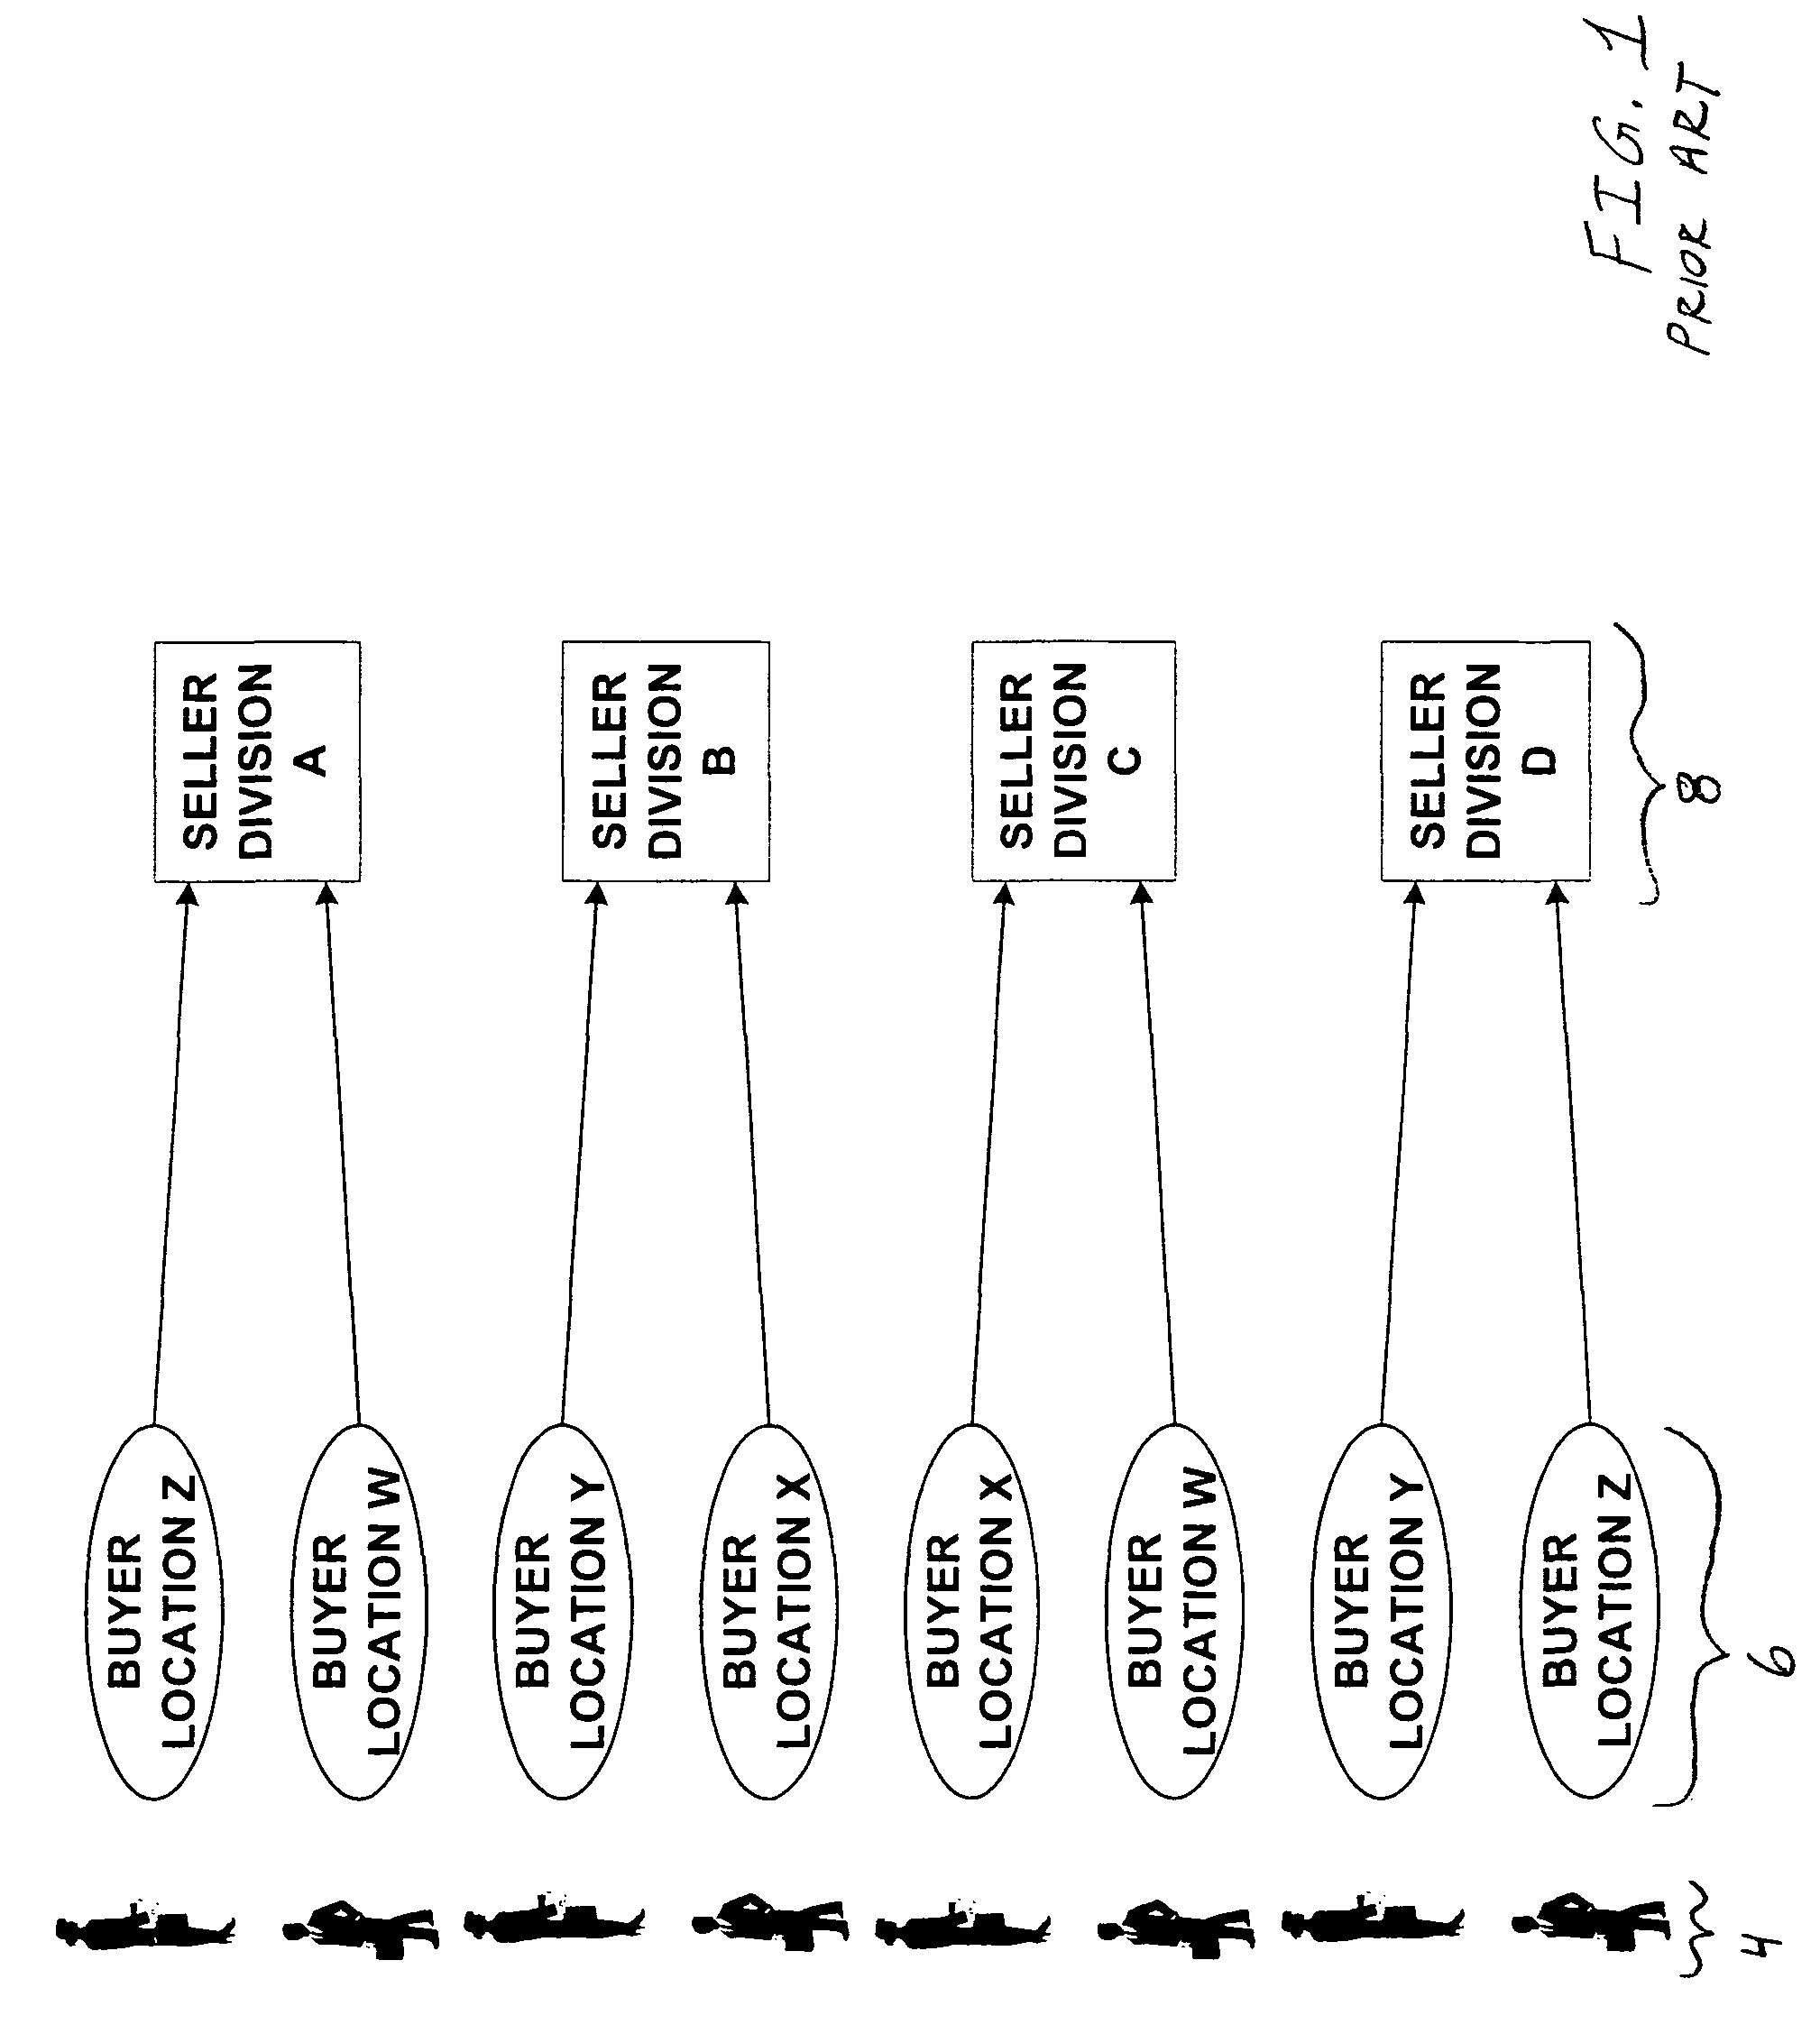 Automated statement presentation, adjustment and payment system and method therefor